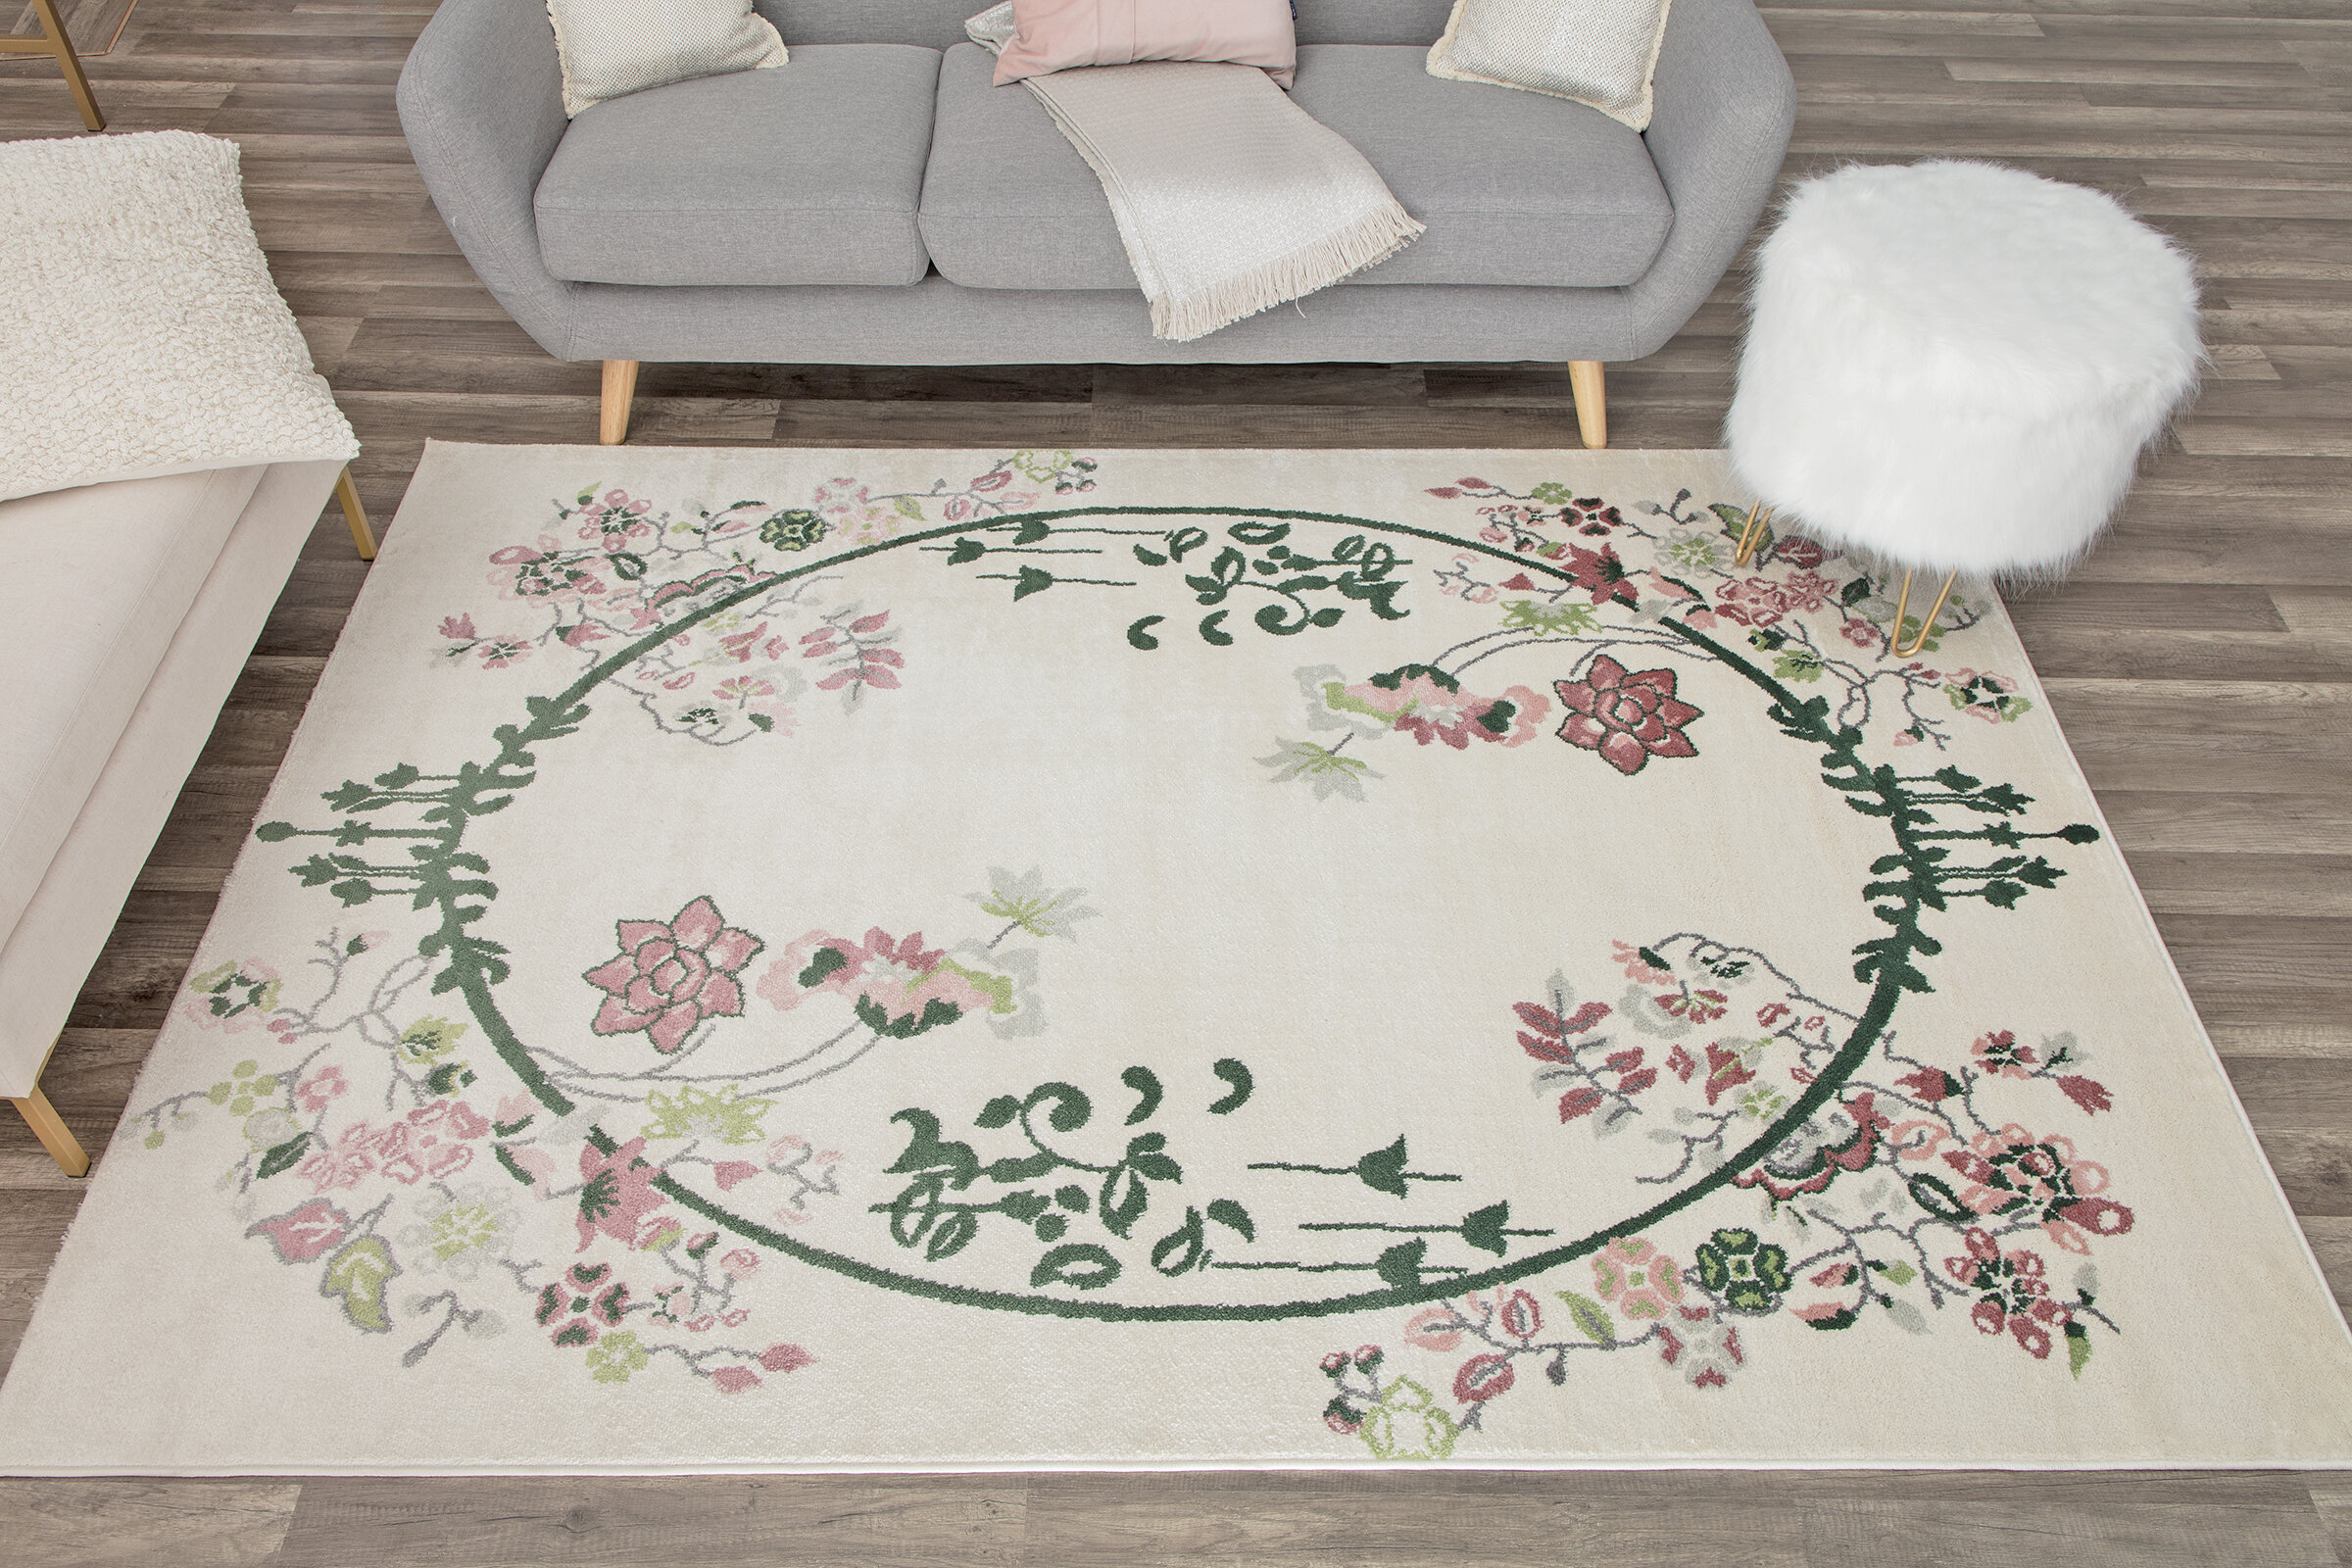 ALAZA My Daily Vintage Flower Dark Green Floral Area Rug 3'3 x 5' Living Room Bedroom Kitchen Decorative Unique Lightweight Printed Rugs Carpet 